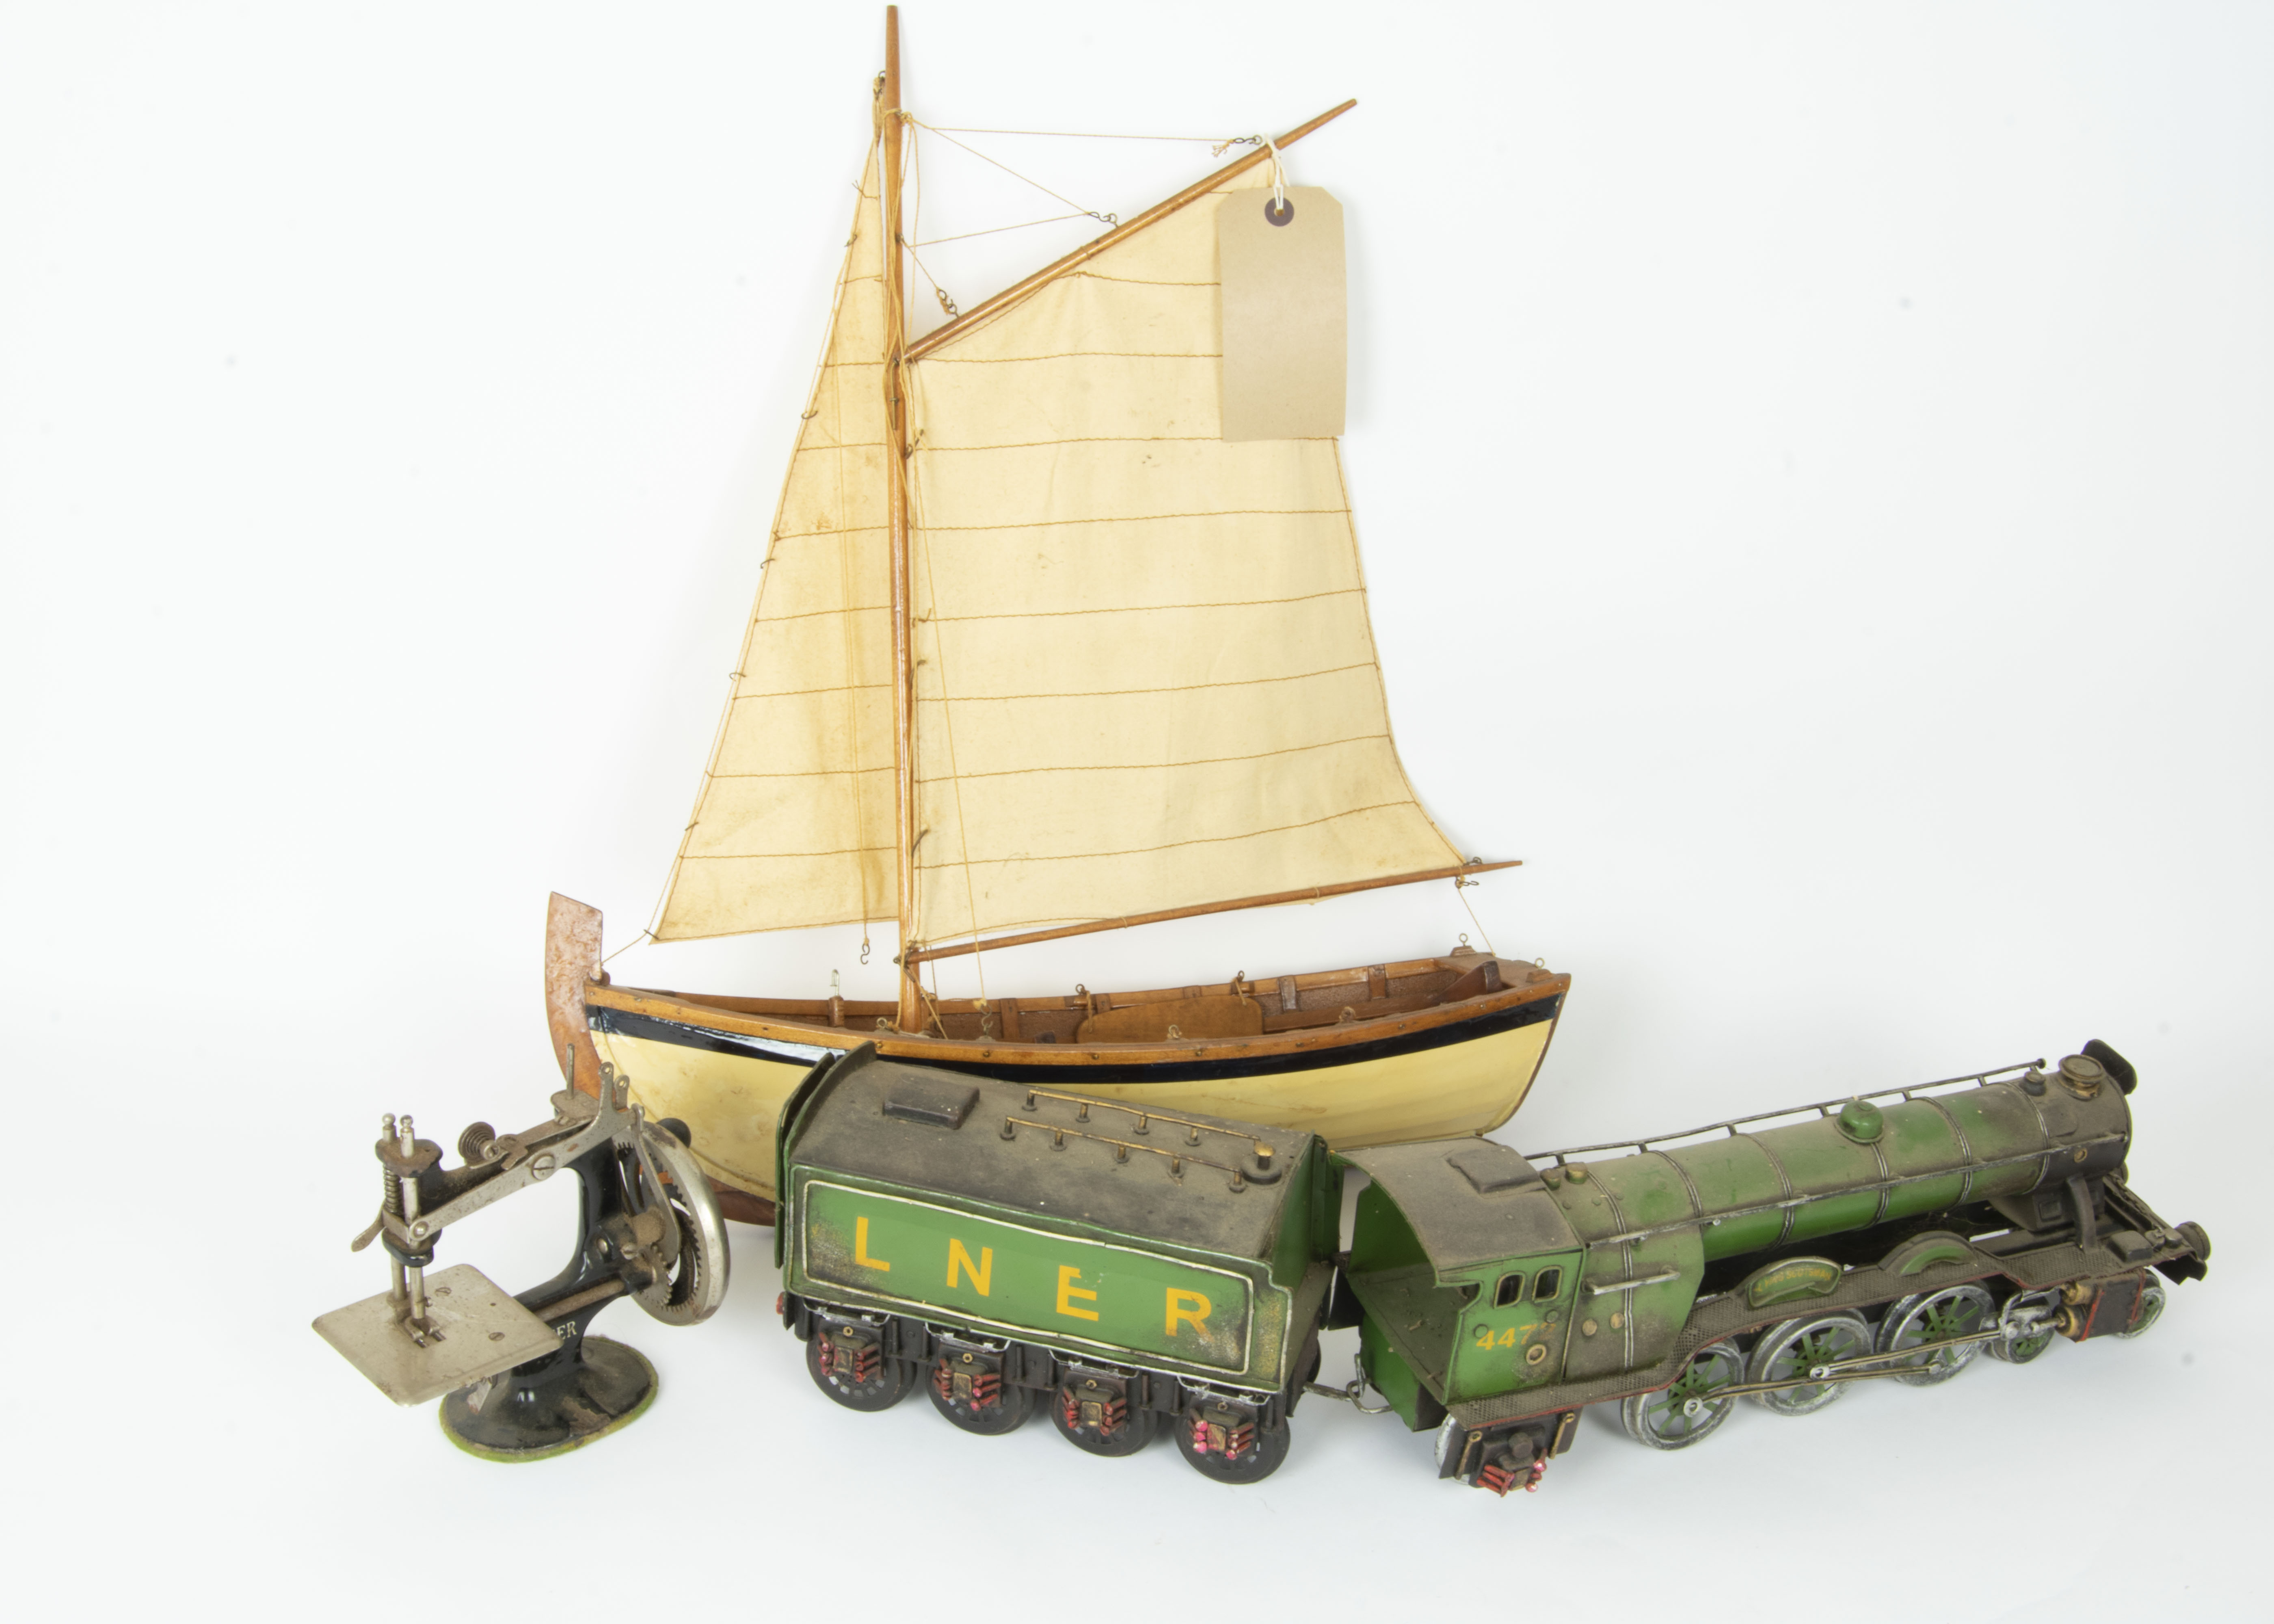 Sailing Dinghy Flying Scotsman Model and small Singer 'Button Hole' sewing machine, Dinghy